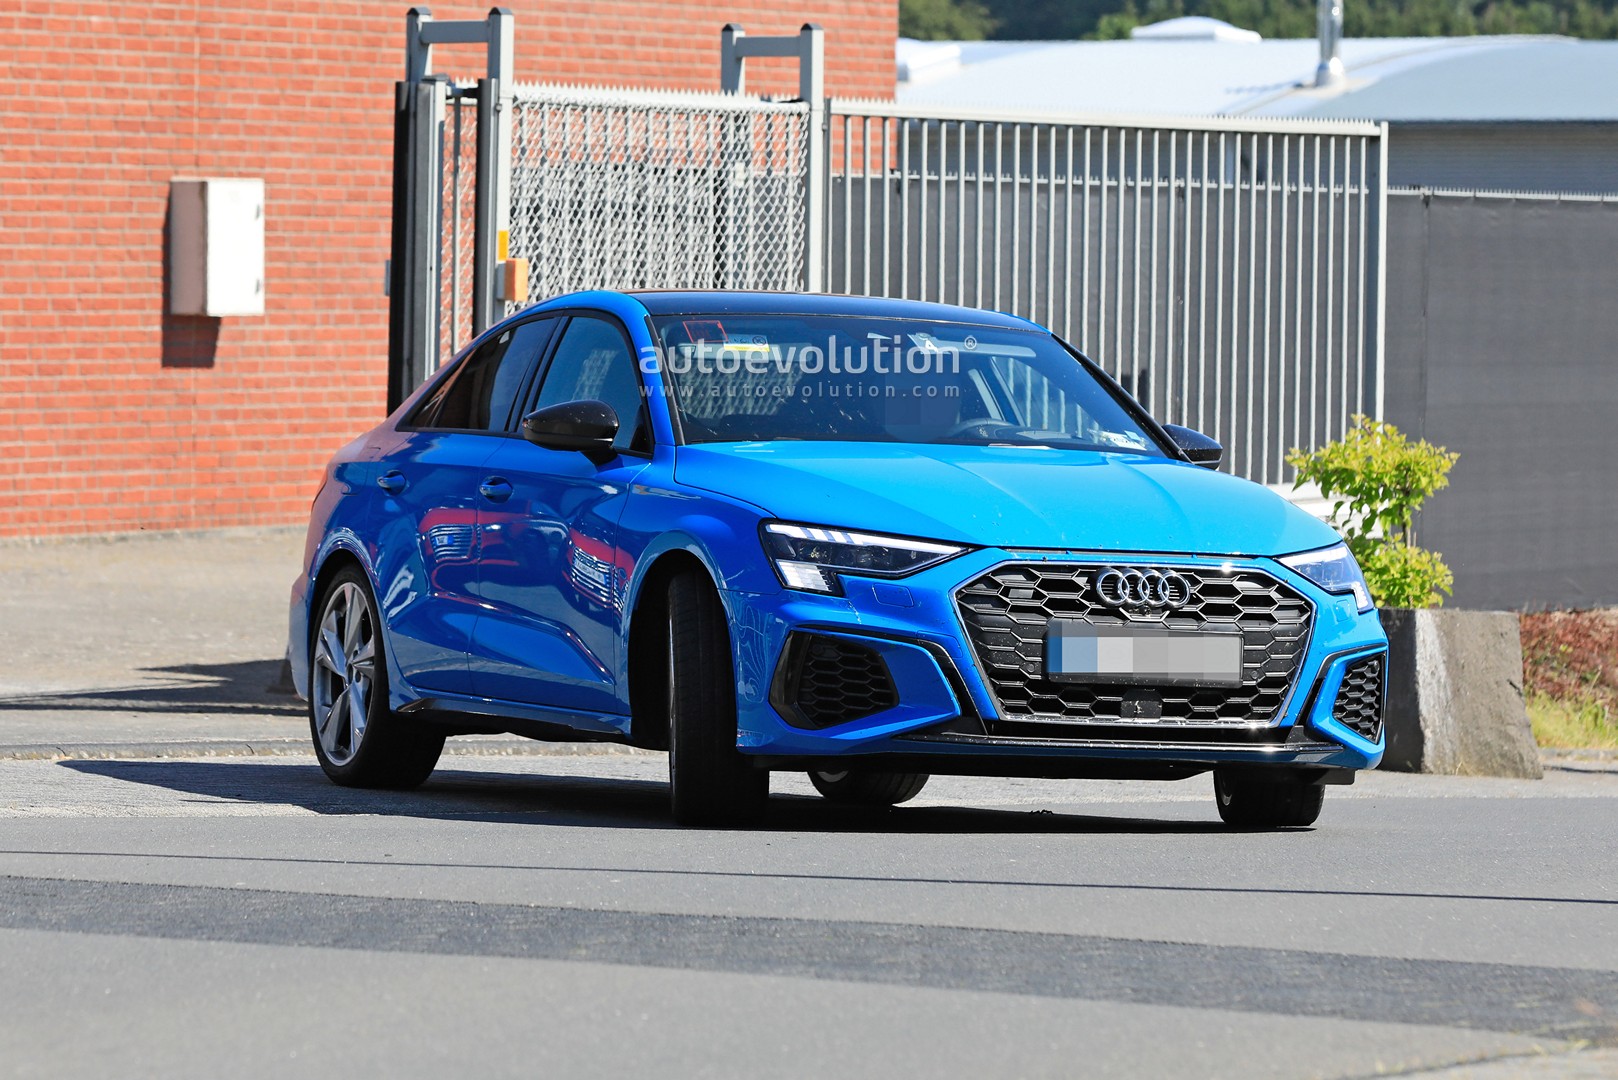 2021 Audi S3 Rocks Blue Paint and Quad Exhaust Ahead of ...